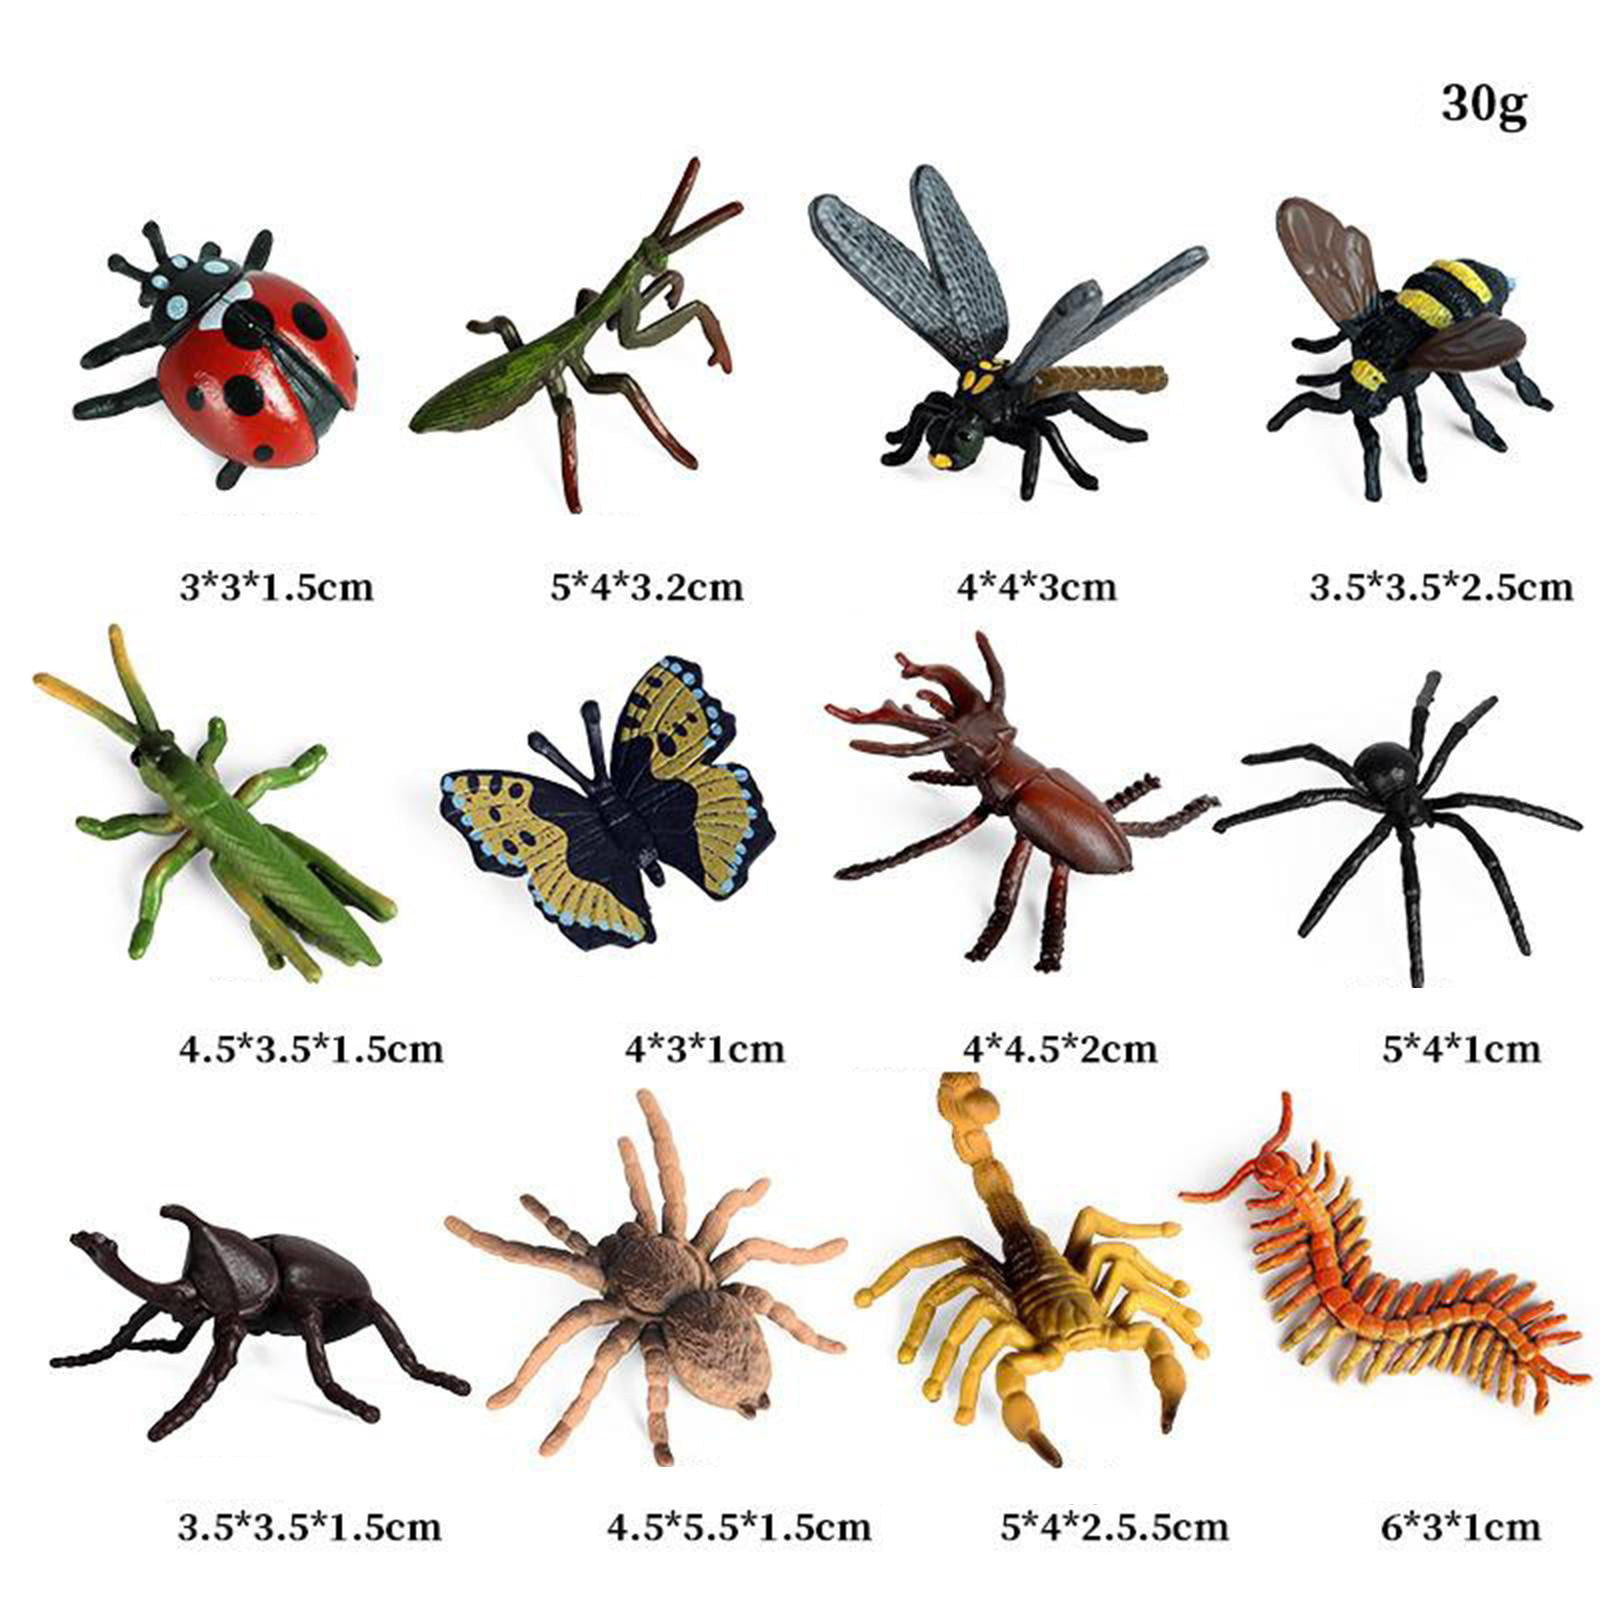 Details about   12pcs Plastic Insect Model Figures Toys Bugs Scorpion Bee Jungle Decors Gift kid 